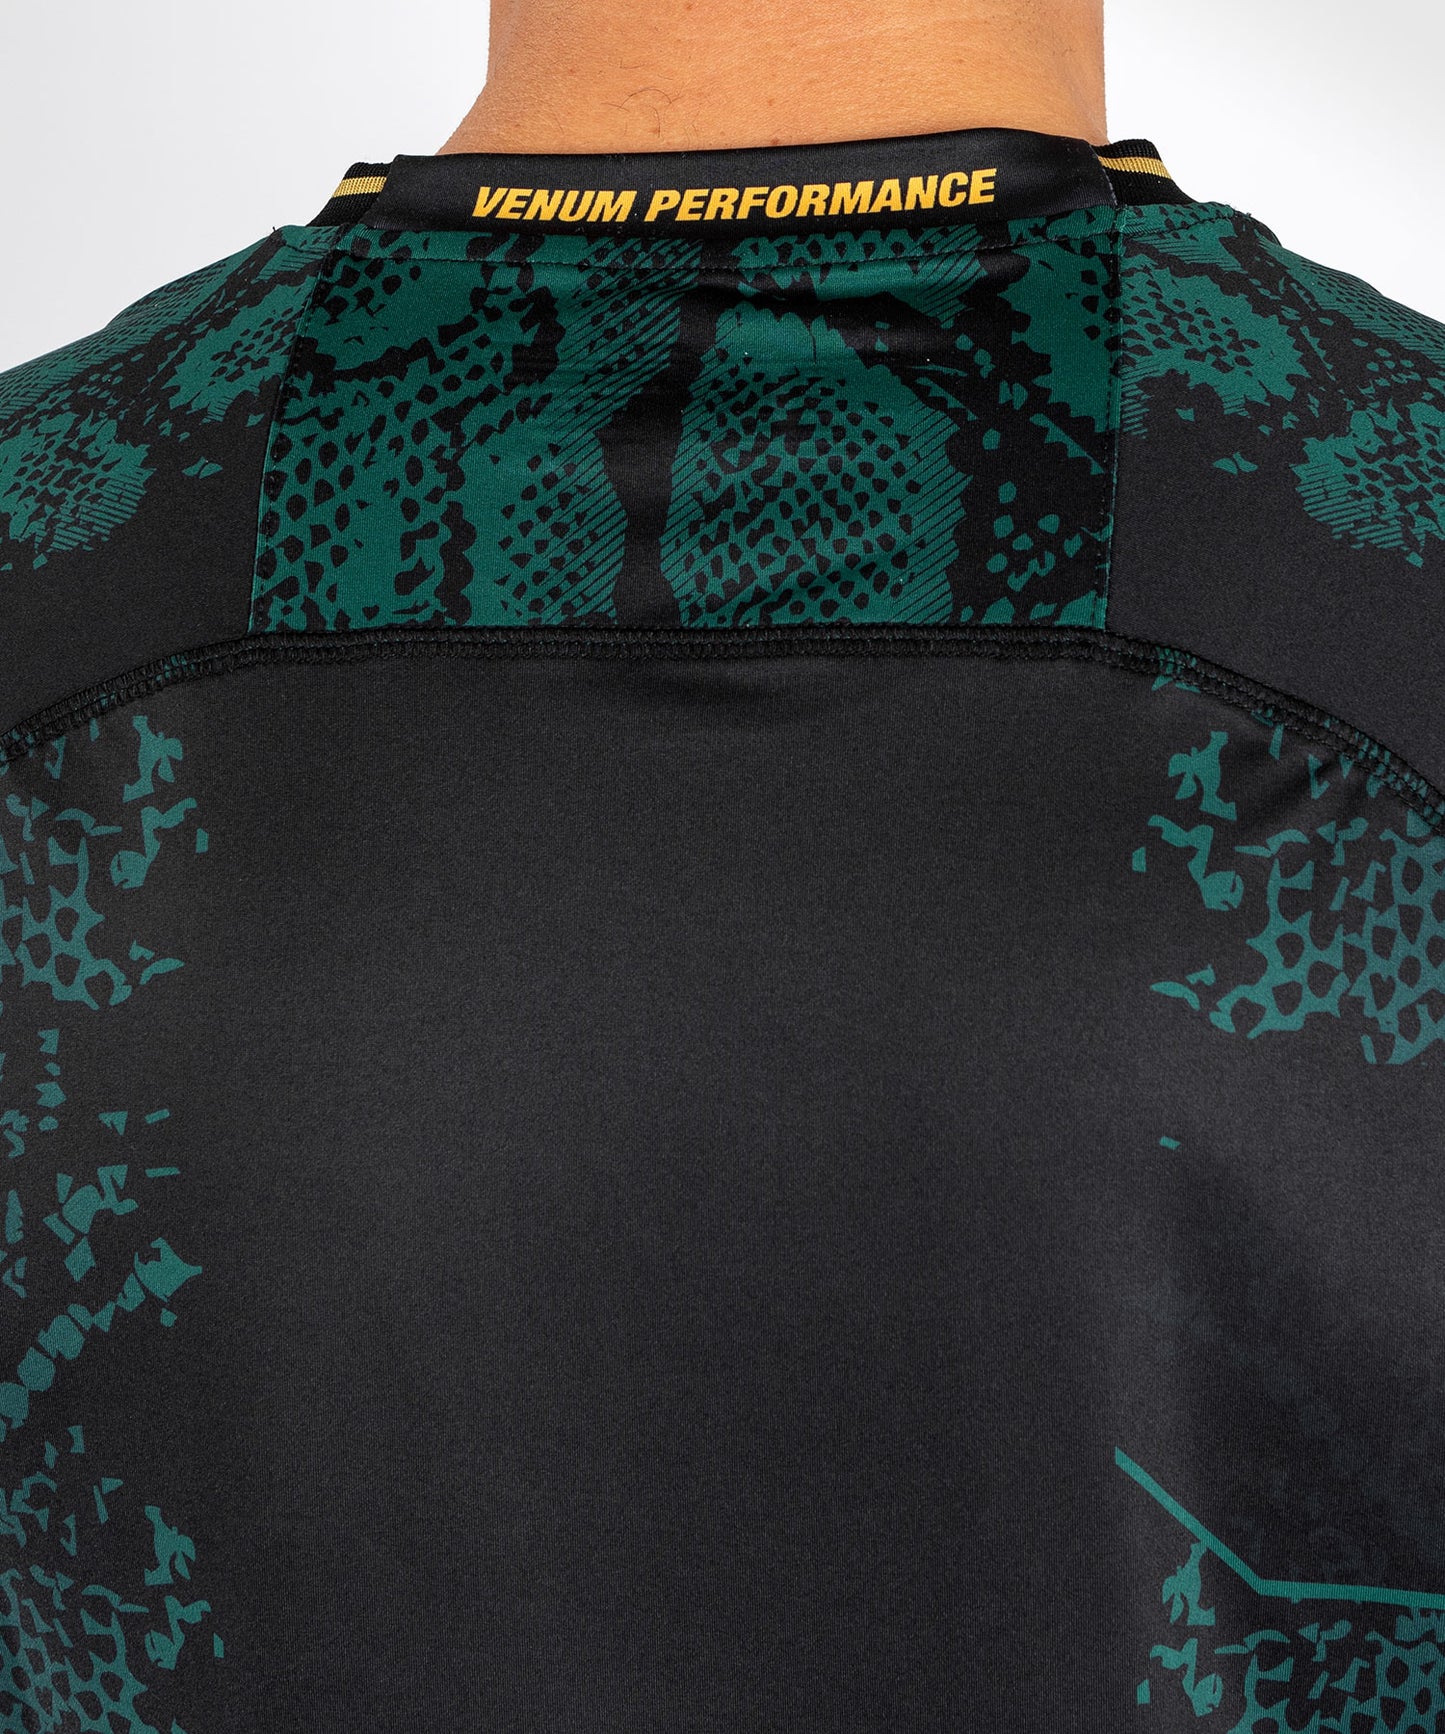 UFC Adrenaline by Venum Personalized Authentic Fight Night Men’s Jersey  - Emerald Edition -  Green/Black/Gold